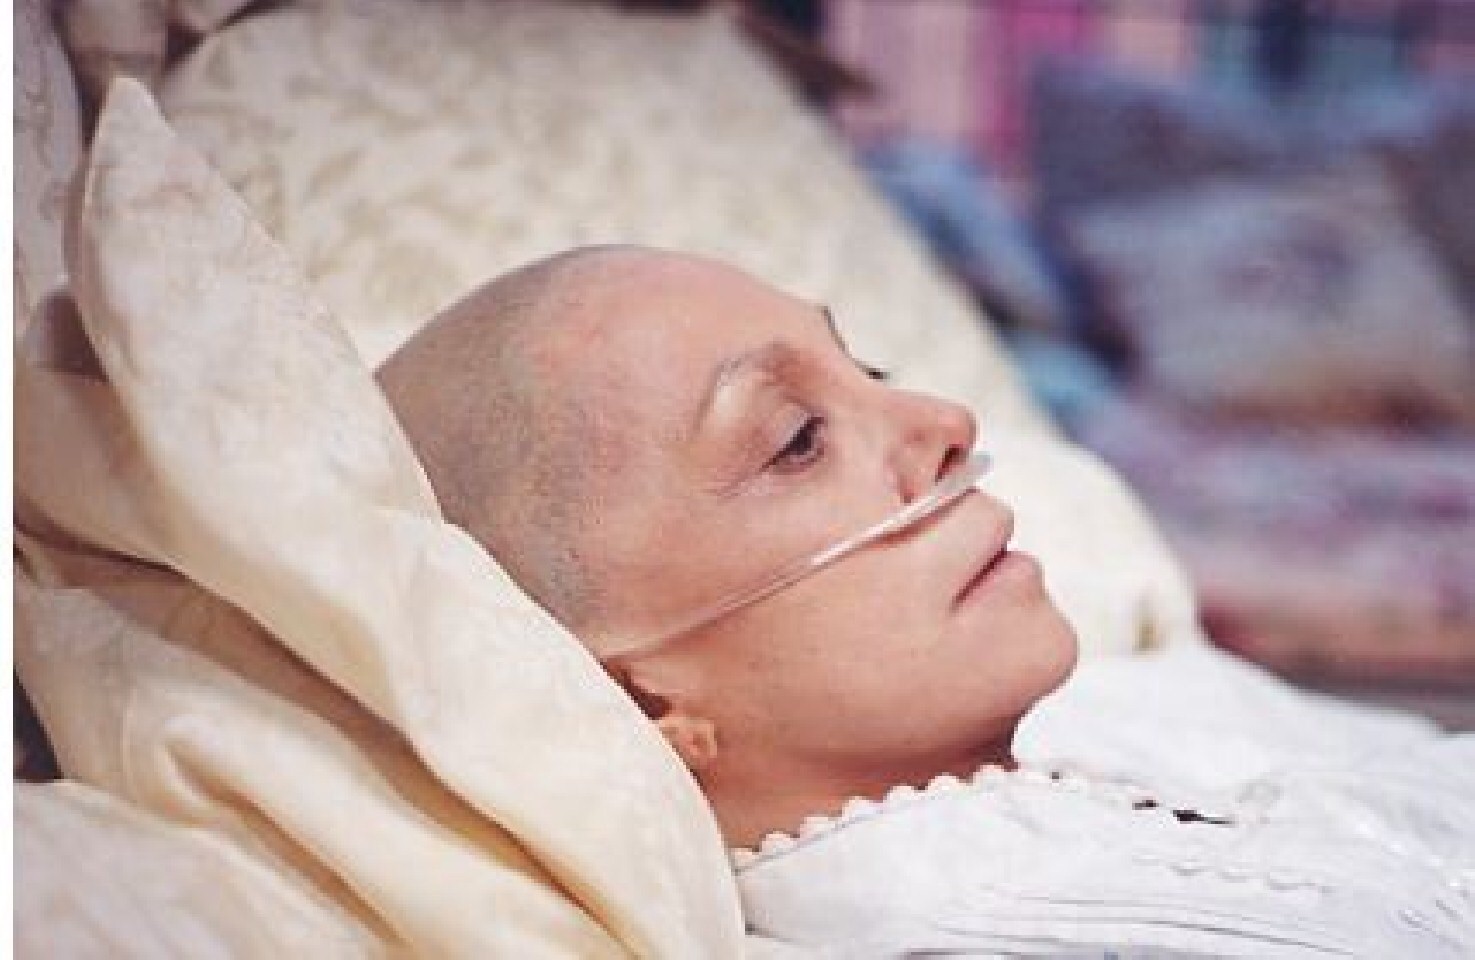 Just in case you missed it, this cancer study is terrifying